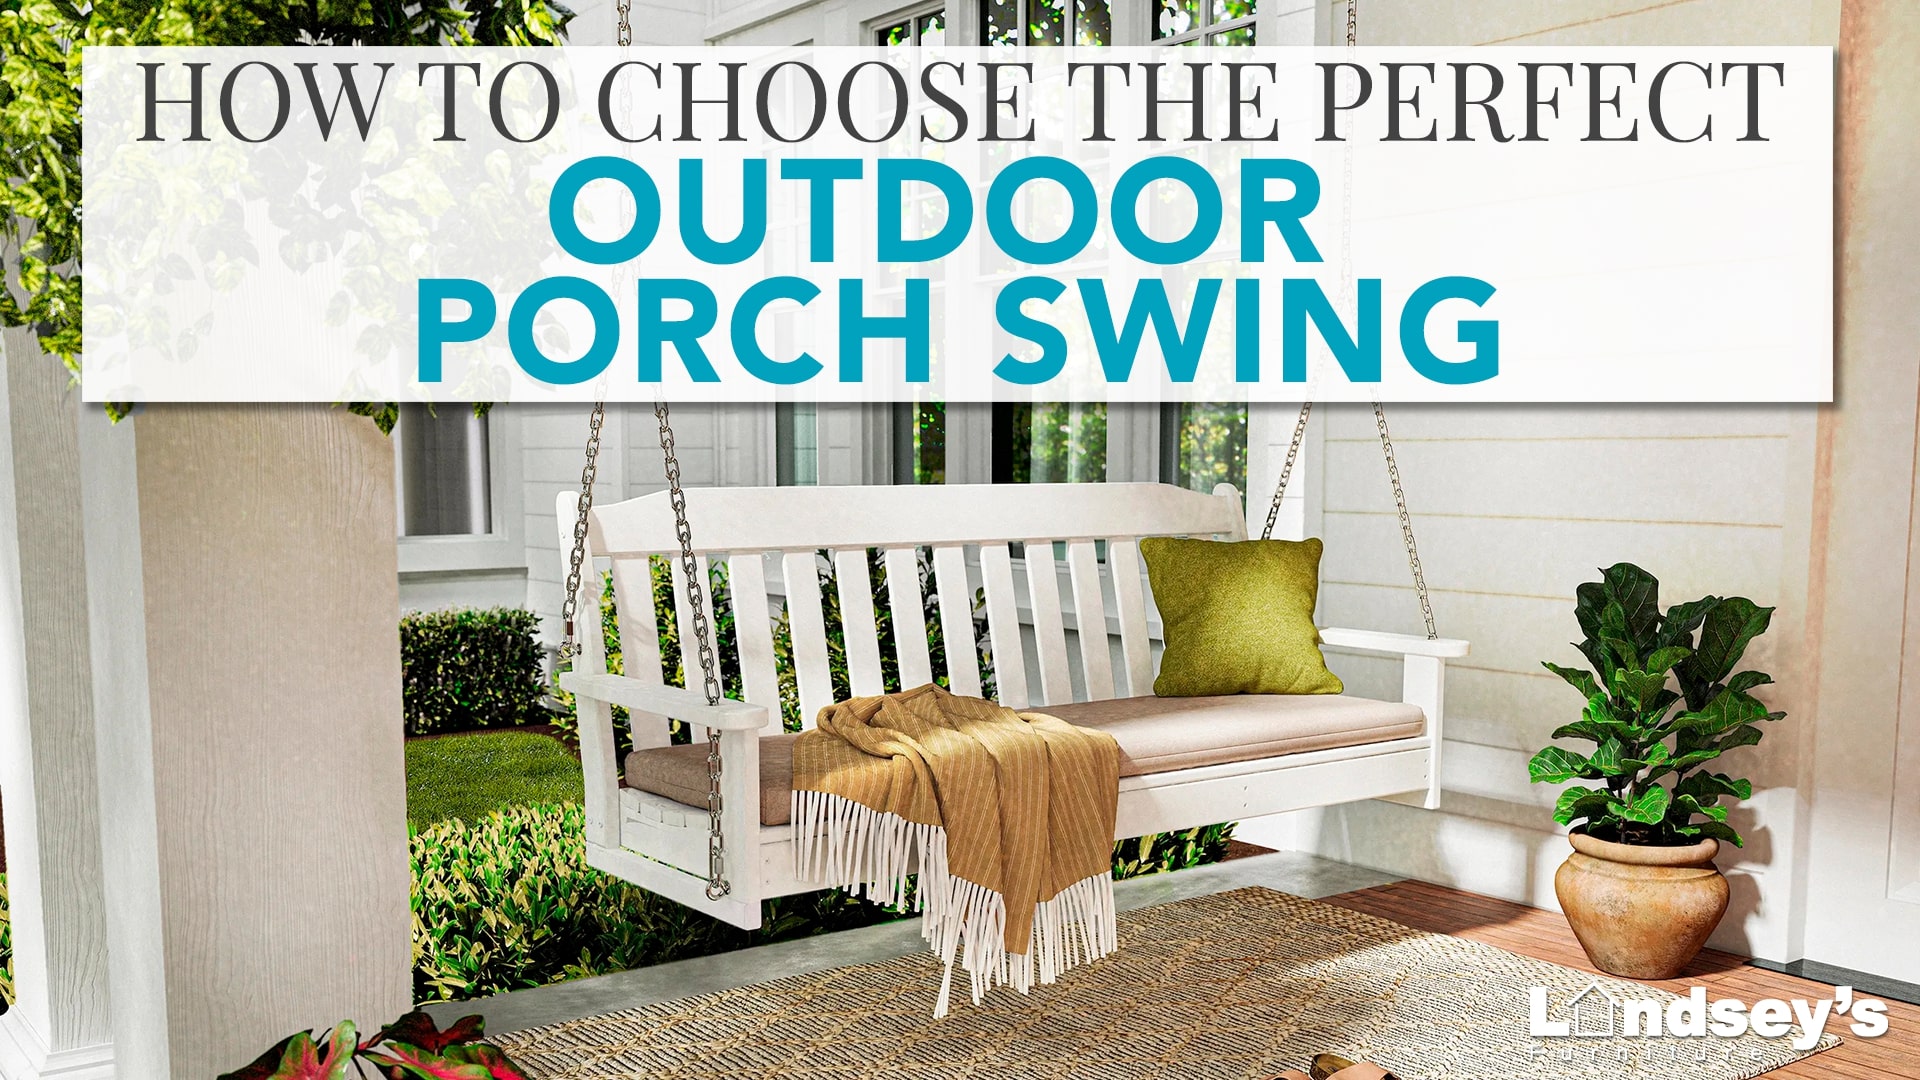 How to Choose the Perfect Outdoor Porch Swing